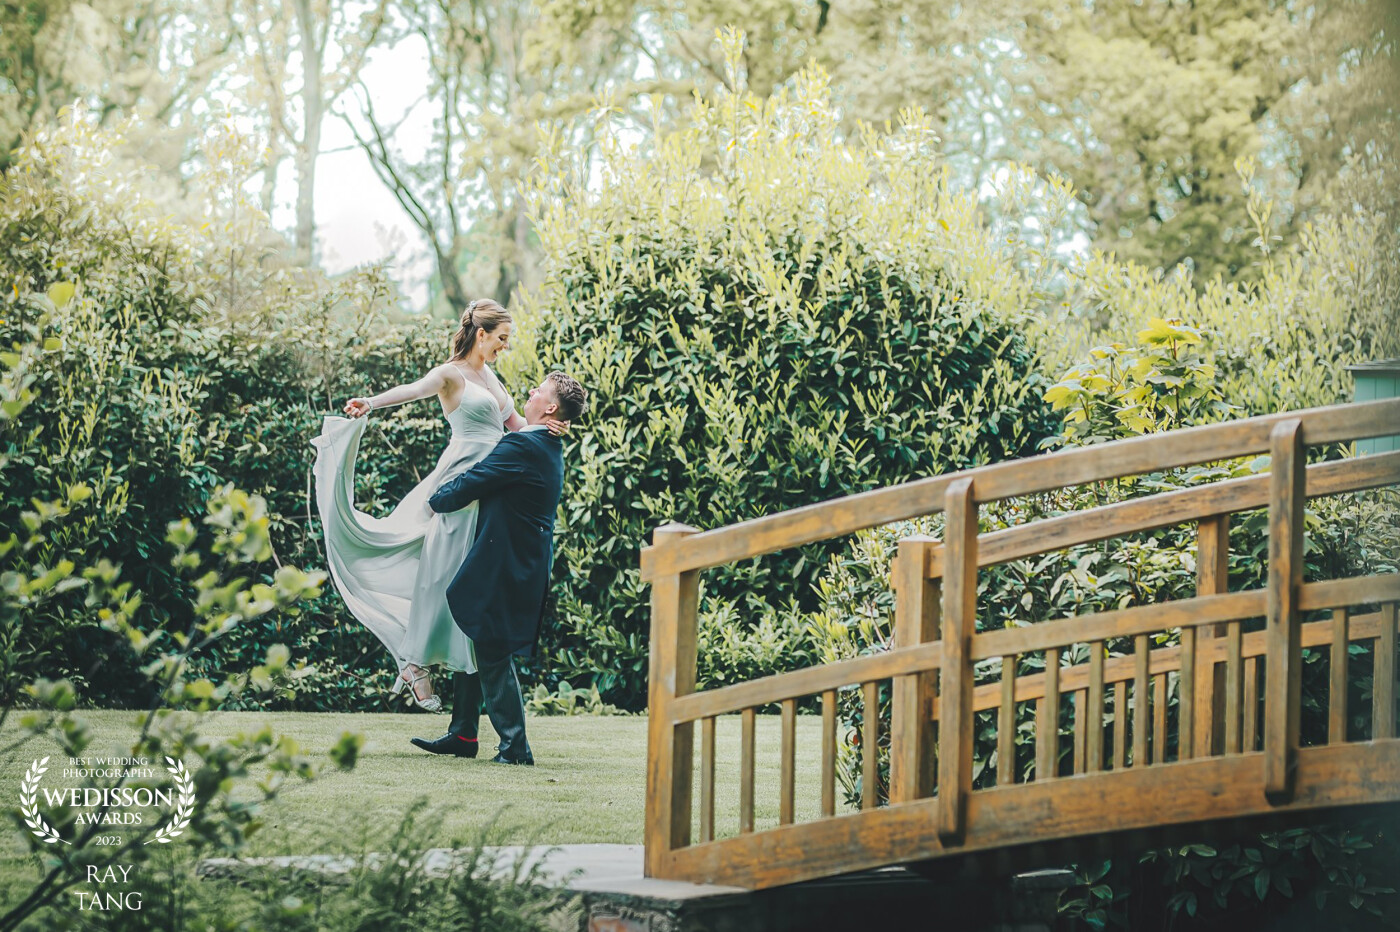 Capturing the magic of a wedding day at the breathtaking Worstead Estate in North Norfolk UK. Happy to capture this moment when the couple just decided to do the lift and spin at the end of the bridge.